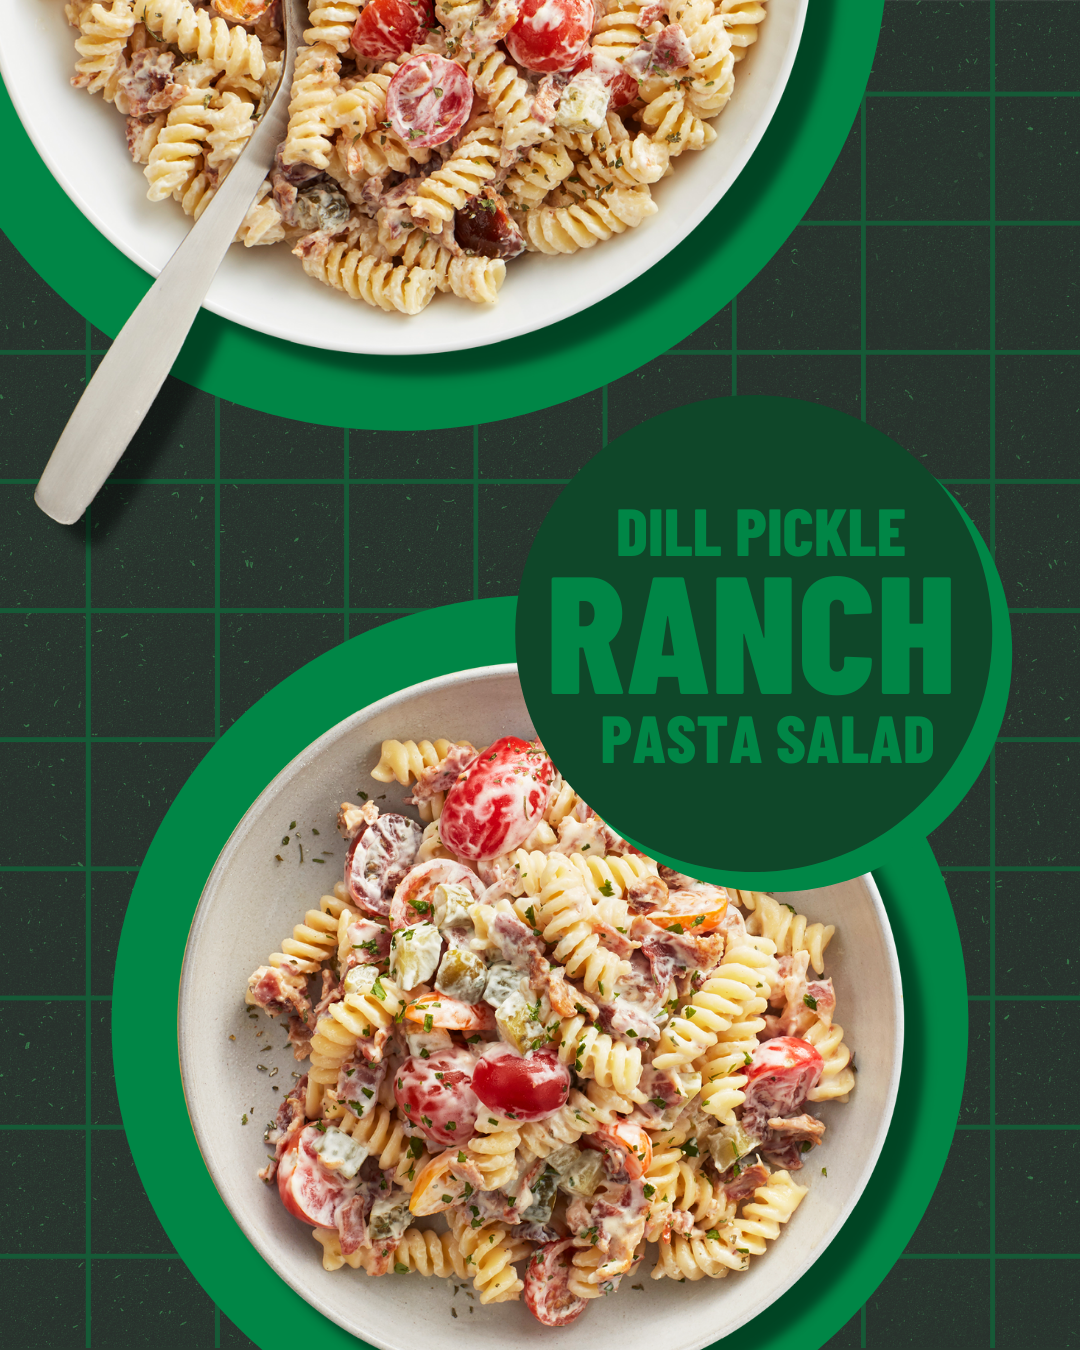 HVR_FY21_Dill_Pickle_Ranch_Pasta_Salad_4X5.png